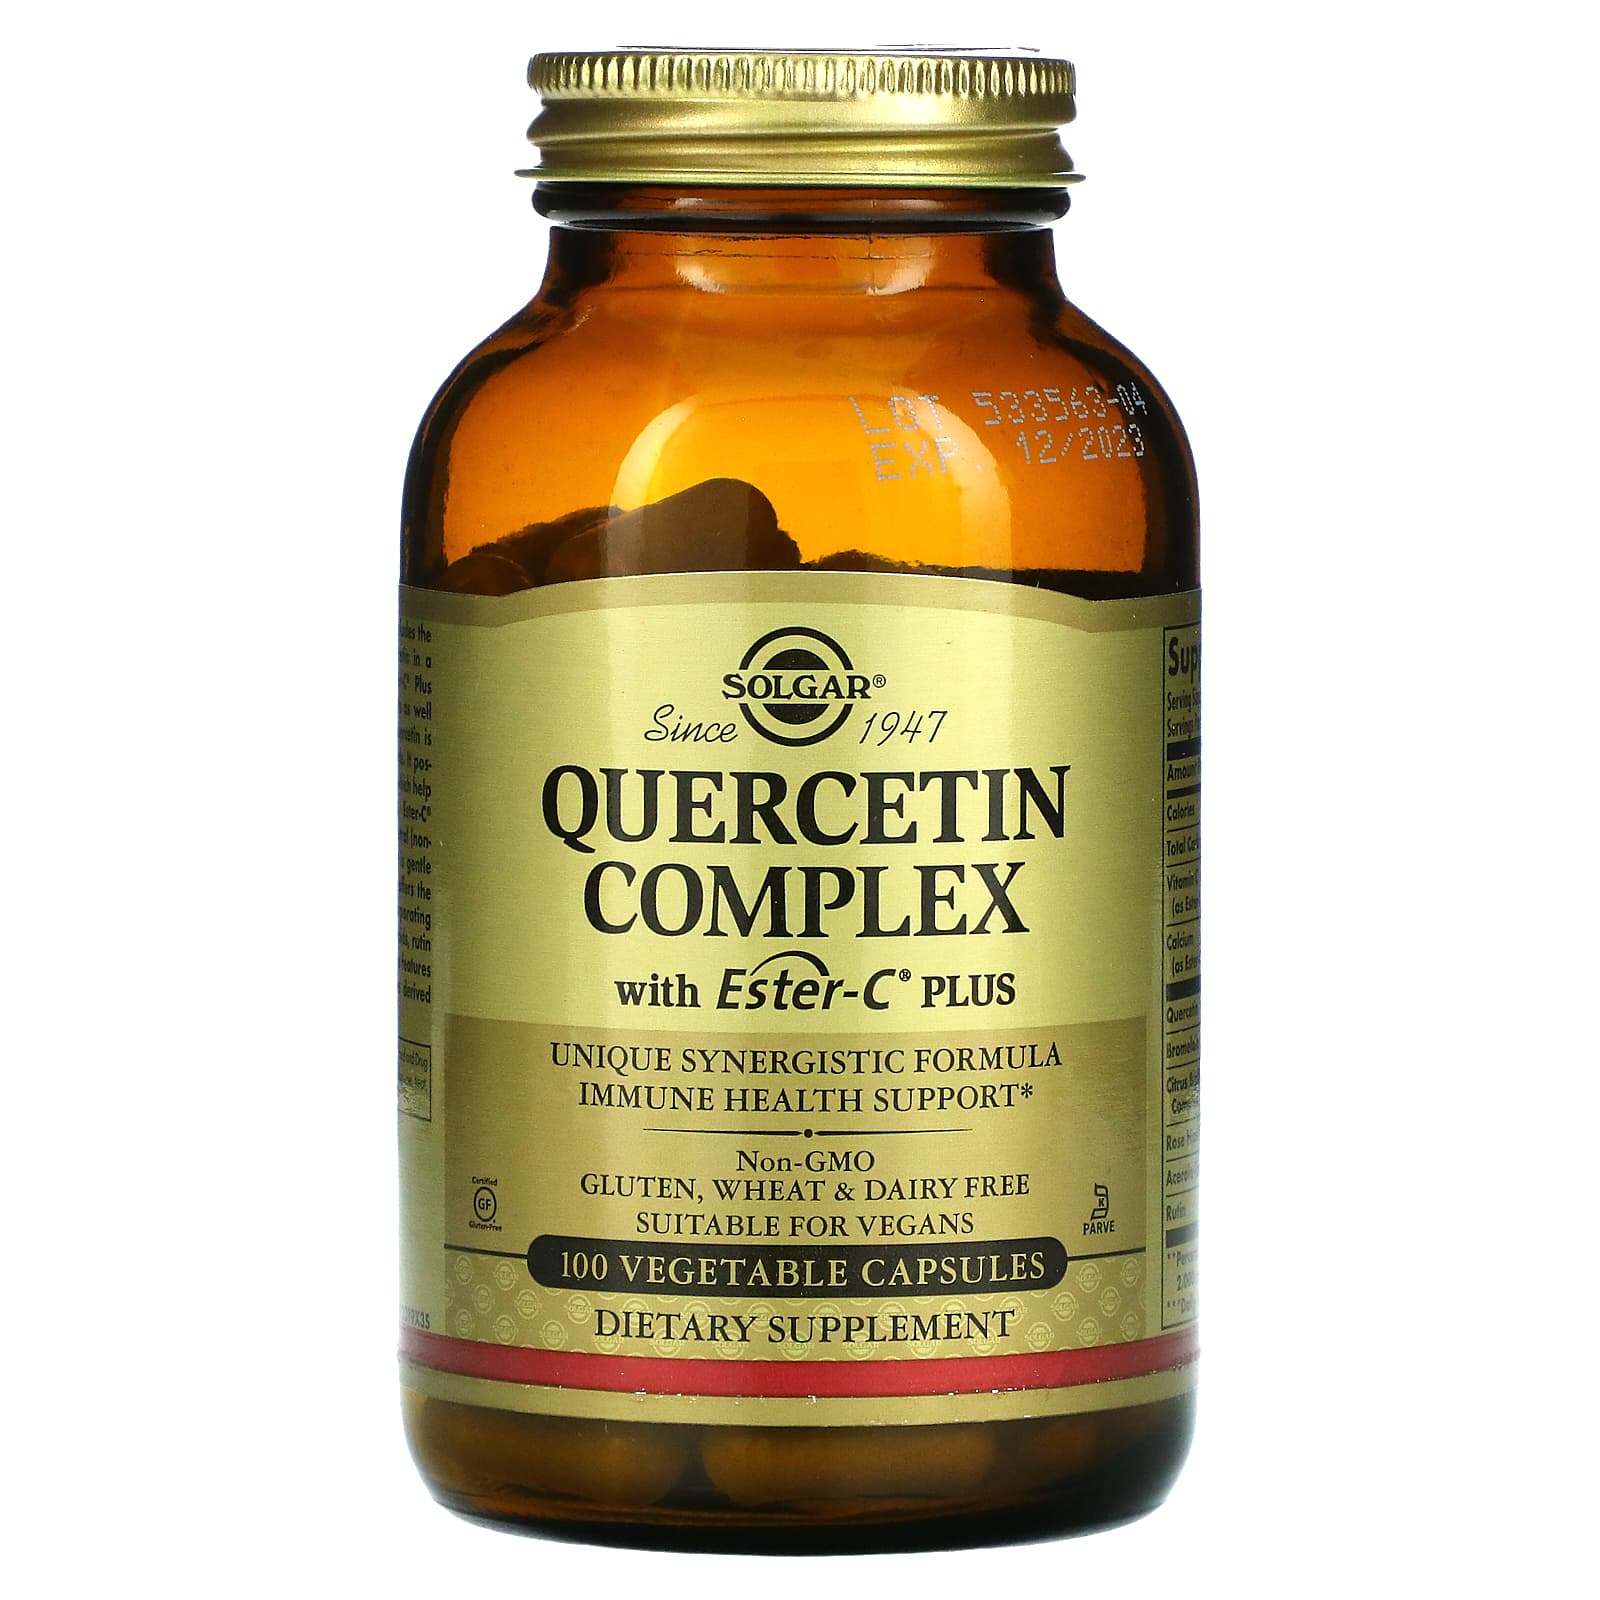 Solgar Quercetin Complex With Ester-C Plus, 100 Vegetable Capsules - Supports Immune Health, Antioxidant - Gentle On The Stomach Vitamin C - Non-GMO, Vegan, Gluten Free, Dairy Free - 50 Servings